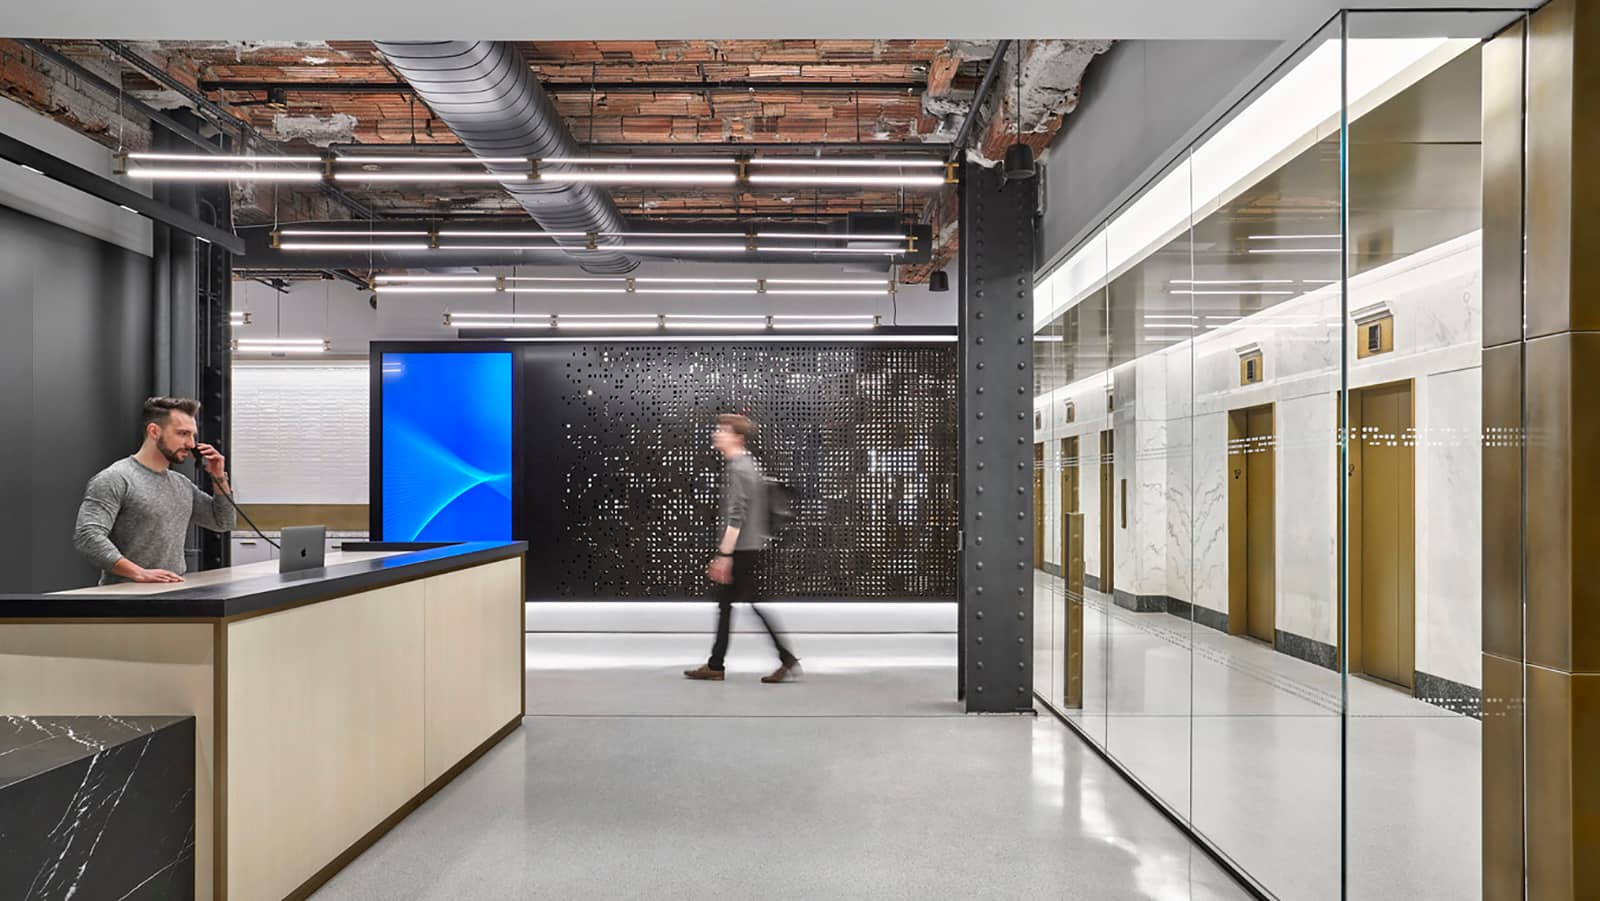 A high-tech reception area at a New York City workspace.